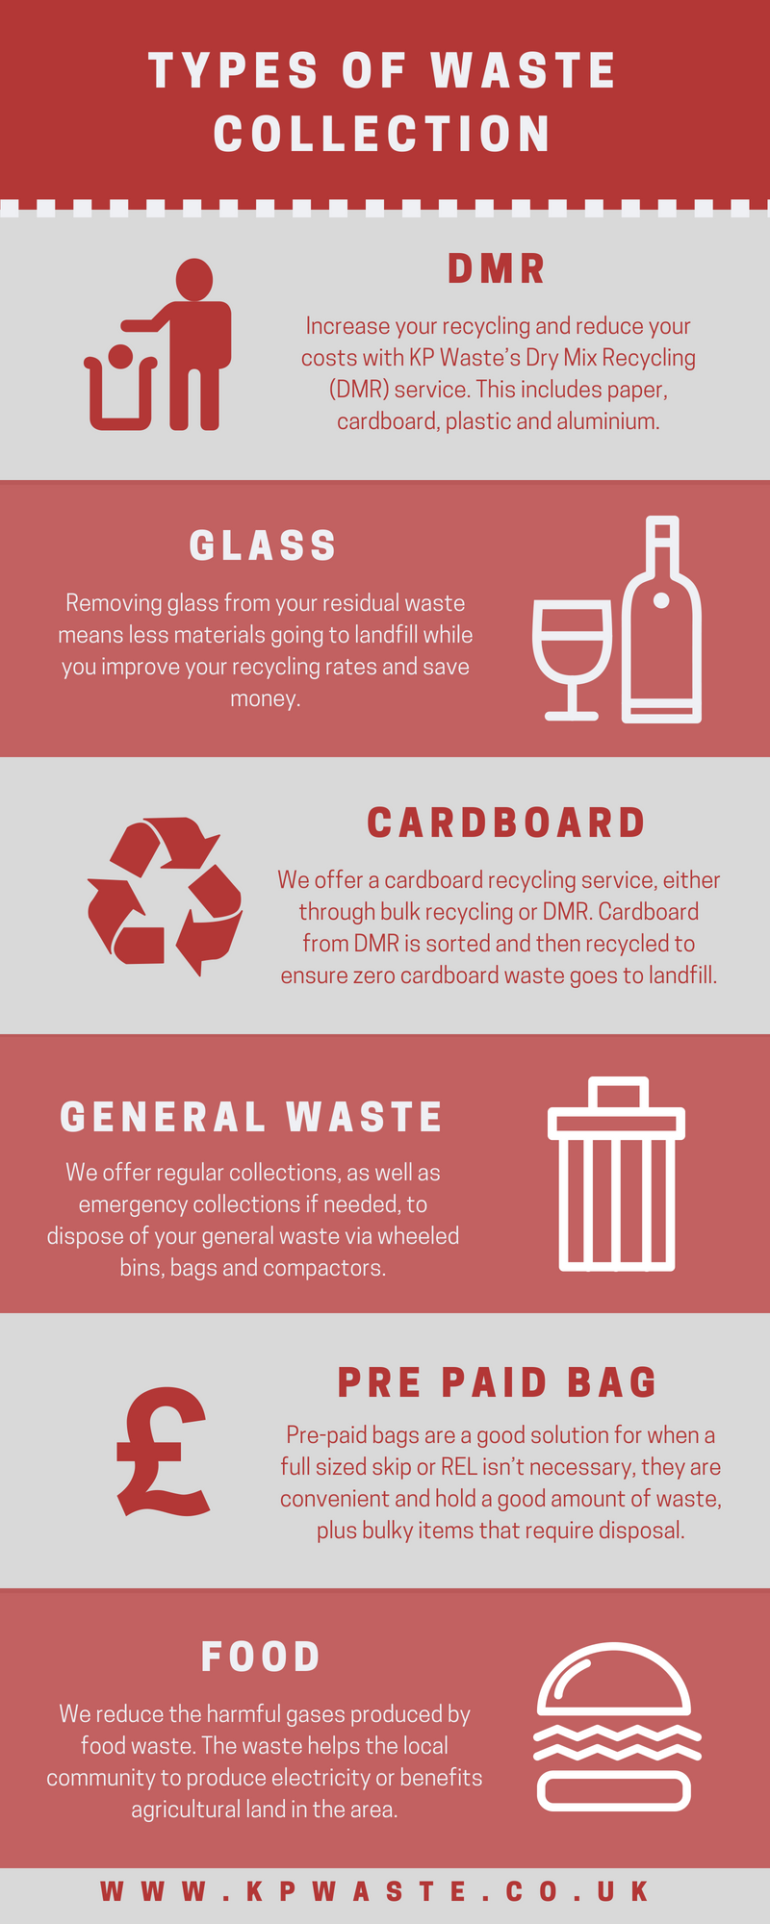 Types of Waste Collection